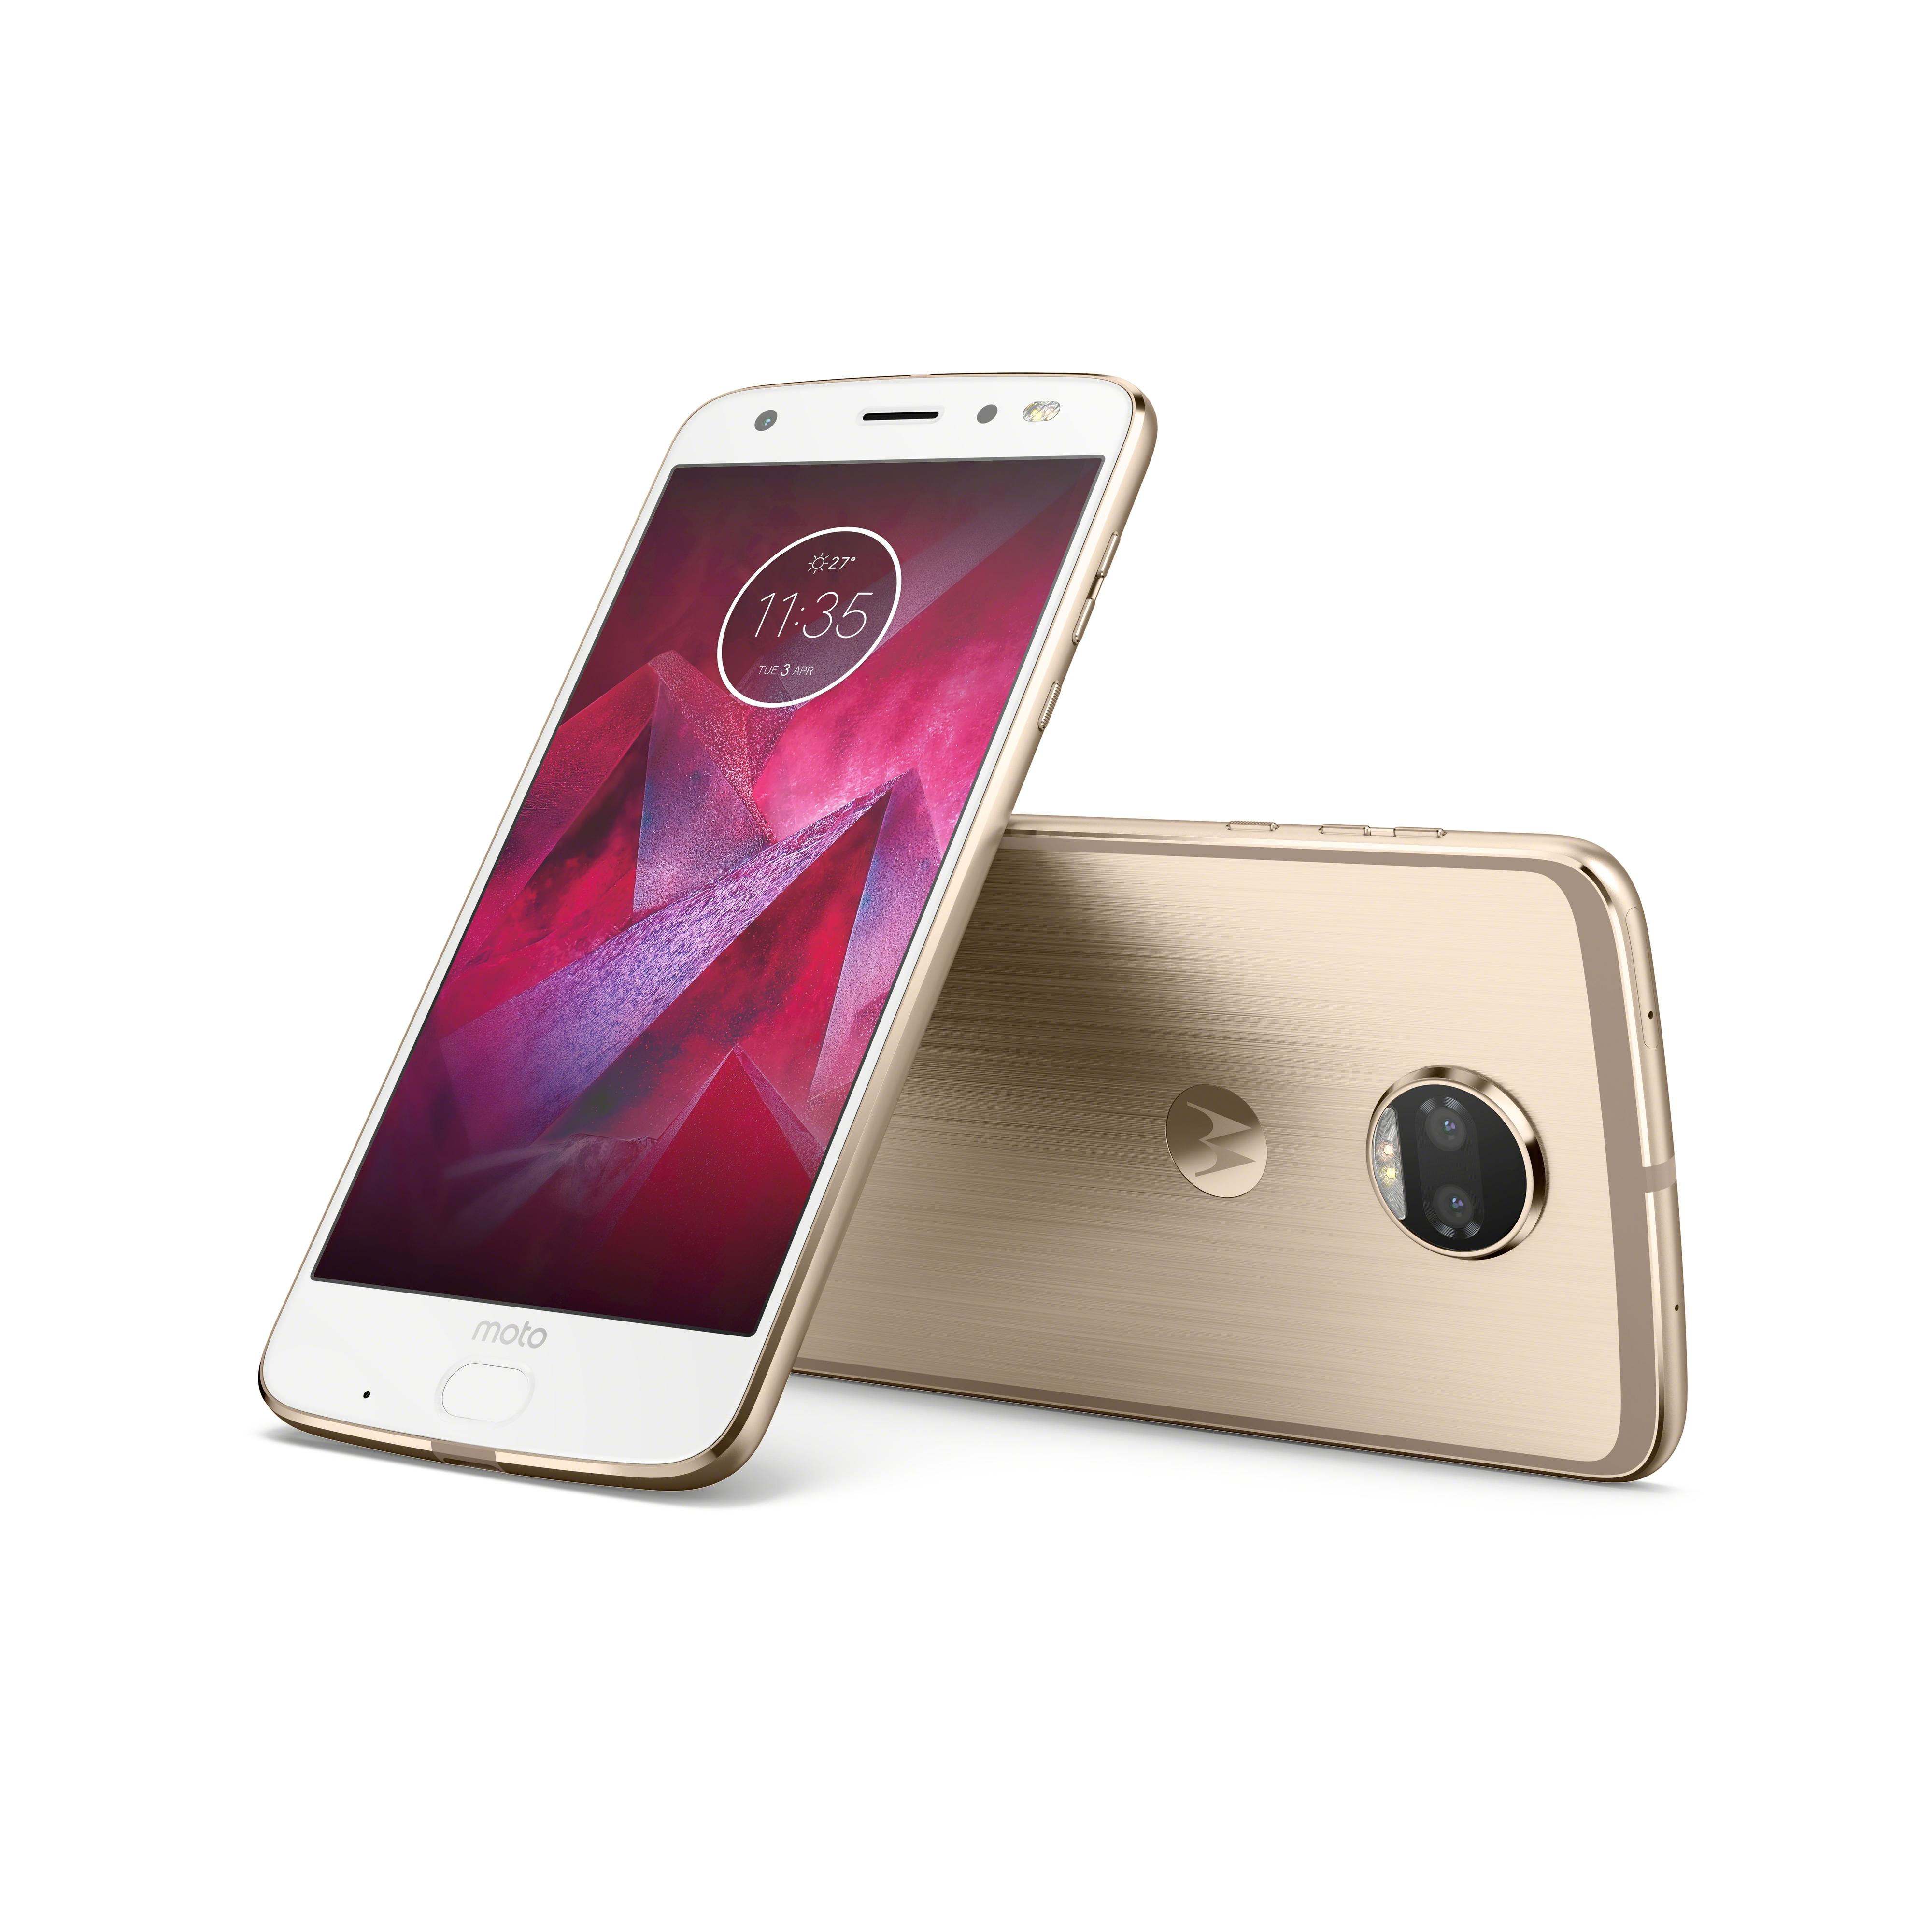 Moto Z2 Force Edition.